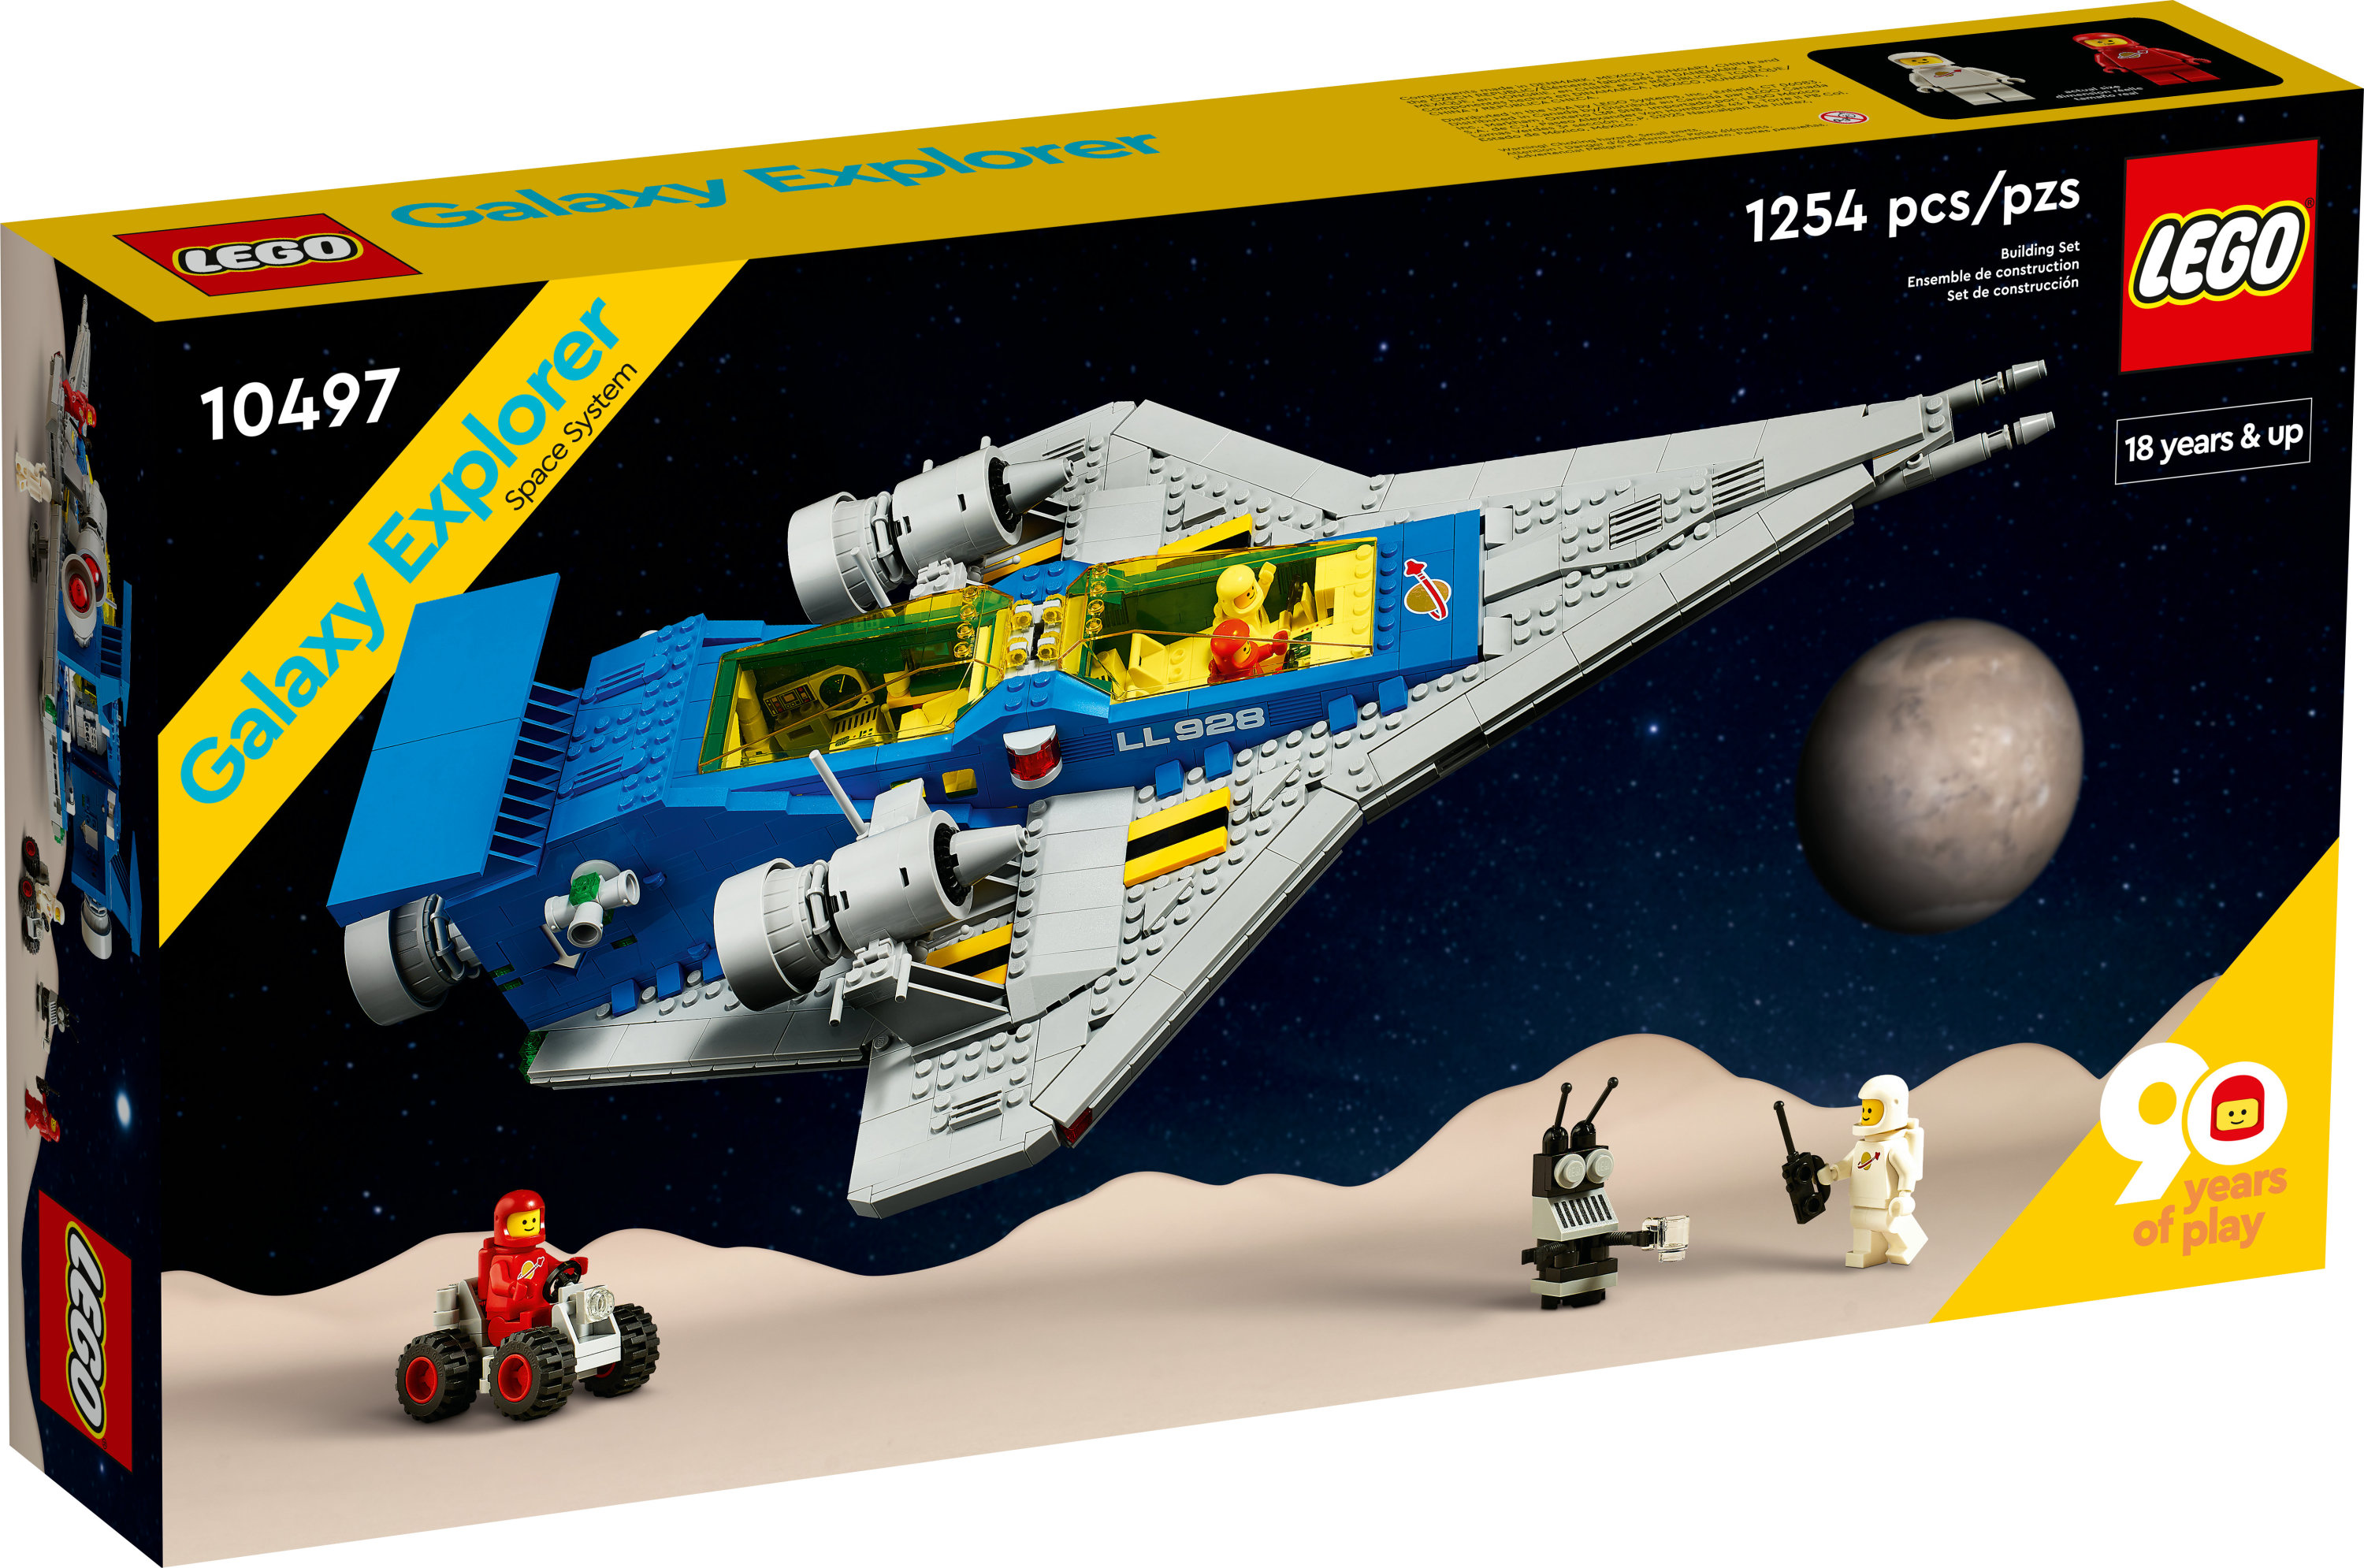 LEGO Icons Galaxy Explorer 10497 90th Anniversary Collectible Edition Model Spaceship, Space Building Set with Astronaut Figures, Gift Idea - image 3 of 8